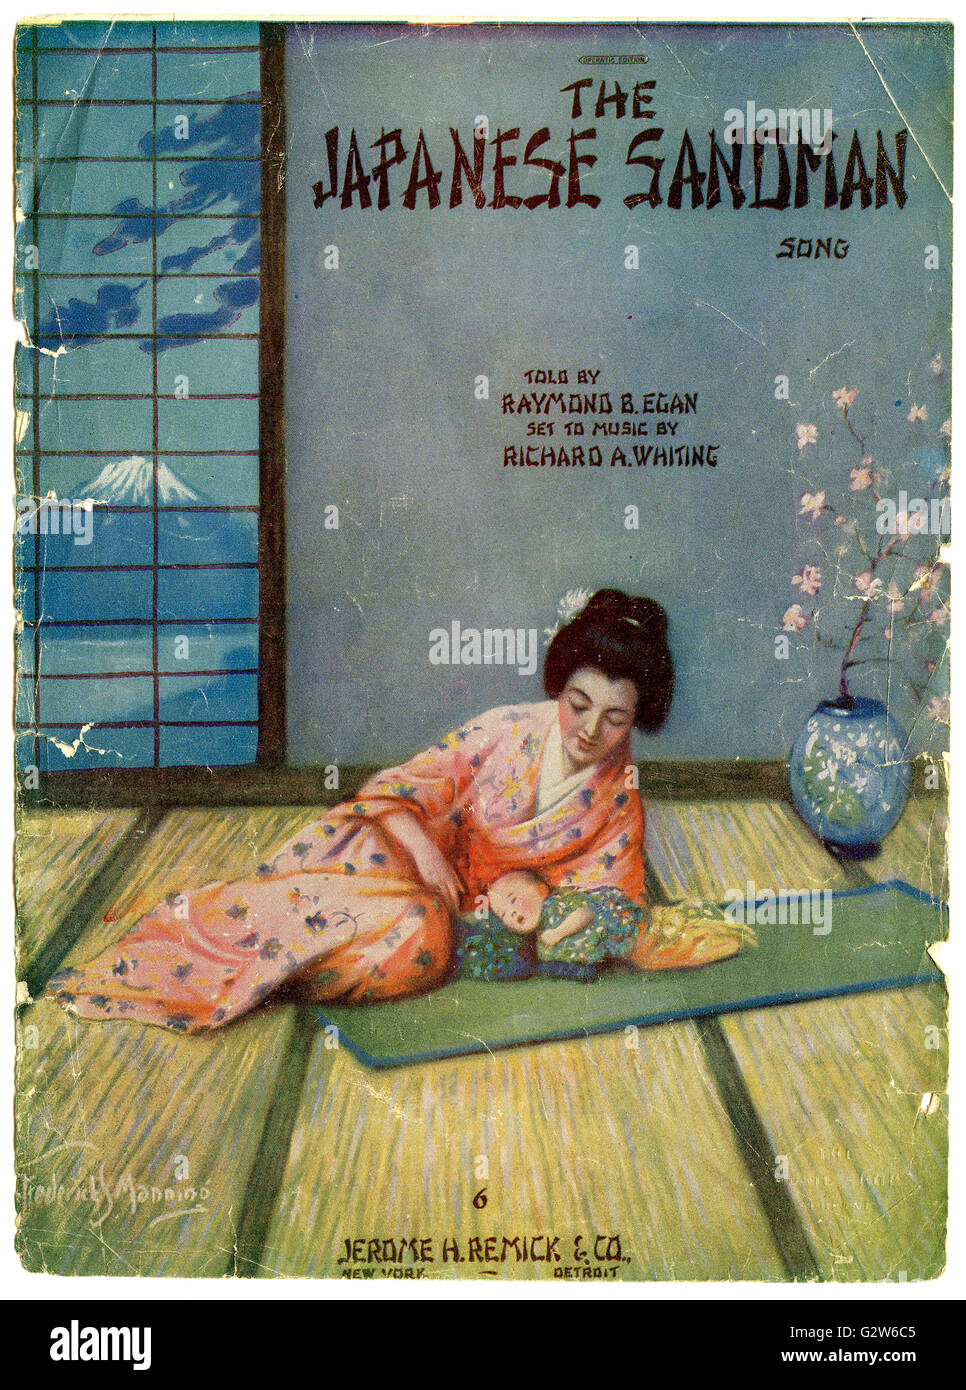 Piano sheet music cover for “The Japanese Sandman” by Raymond B. Egan and Richard A. Whiting. Published by Jerome H. Remick, 192 Stock Photo